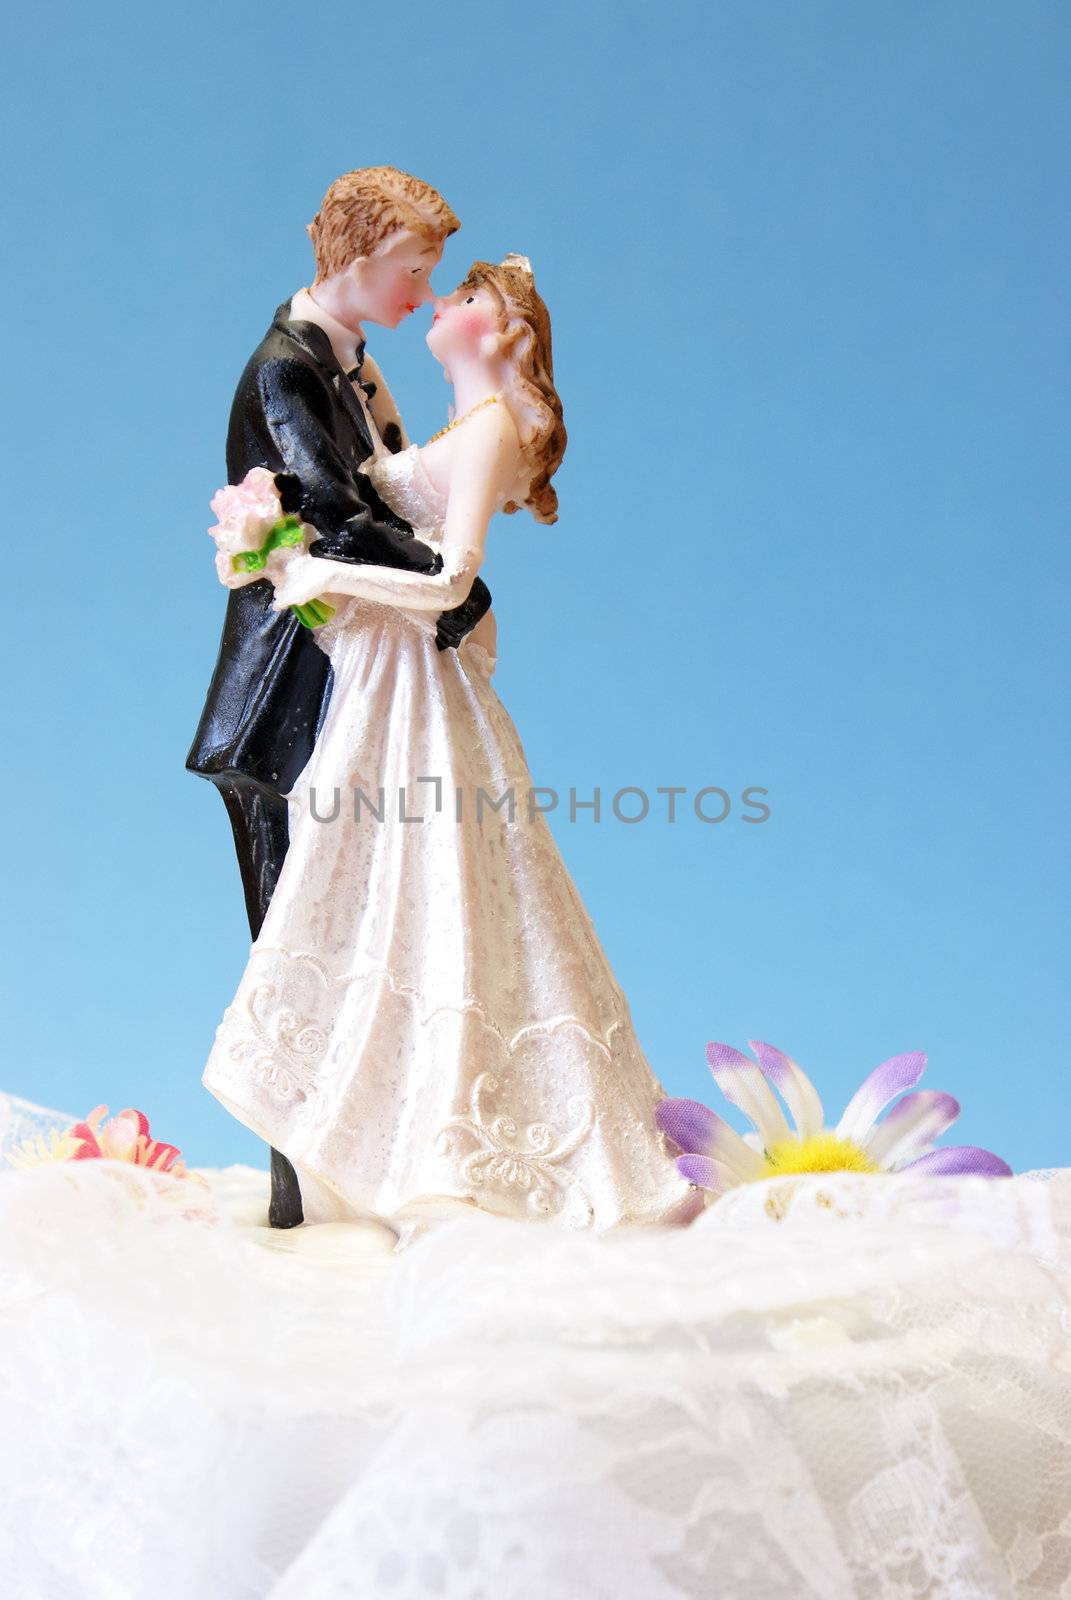 A wedding cake topper on top of the newlyweds dessert.